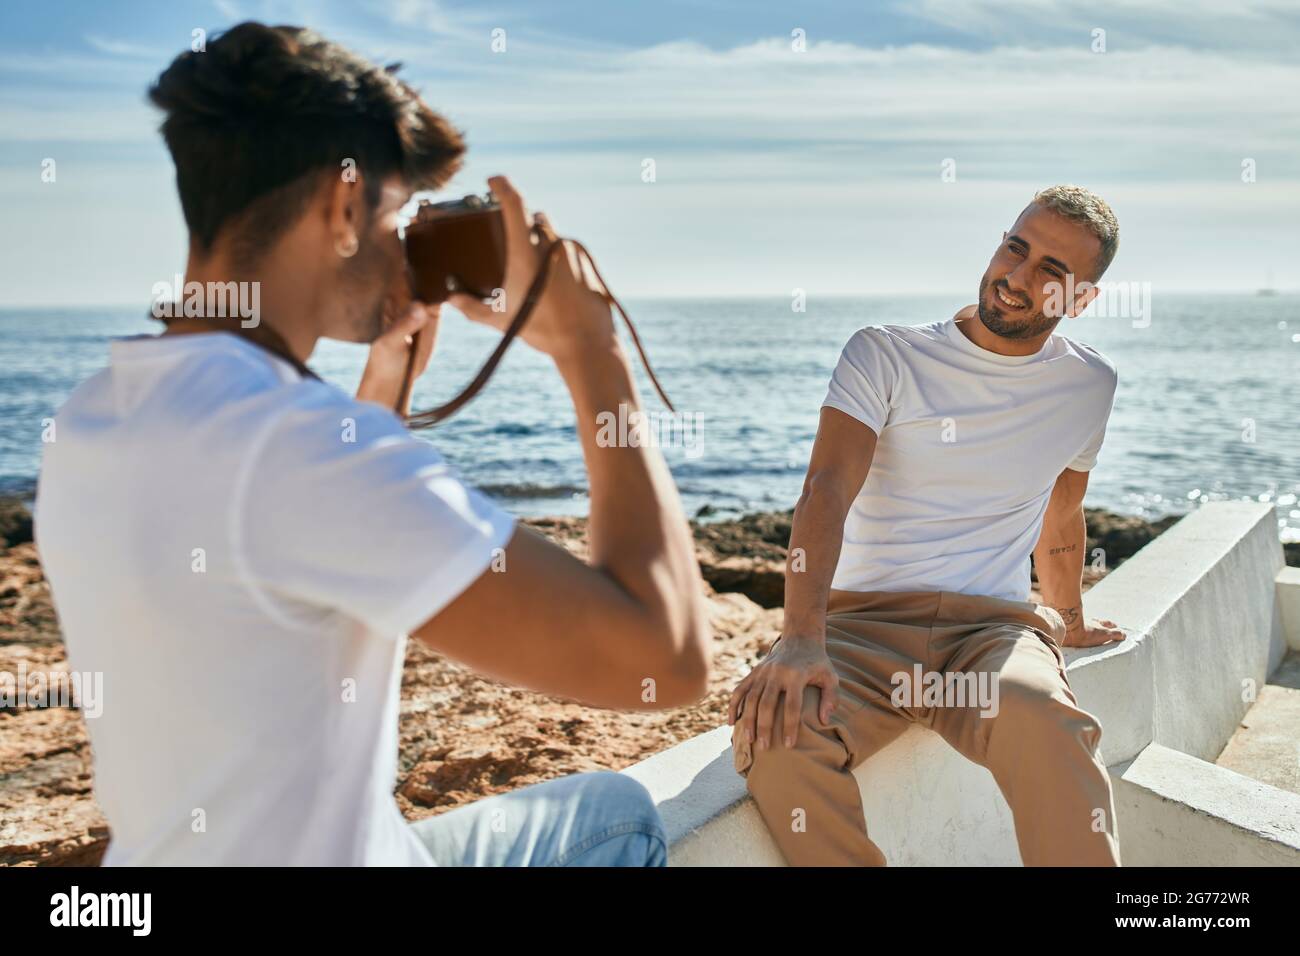 Man taking photos of his boyfriend in front of the sea. Stock Photo